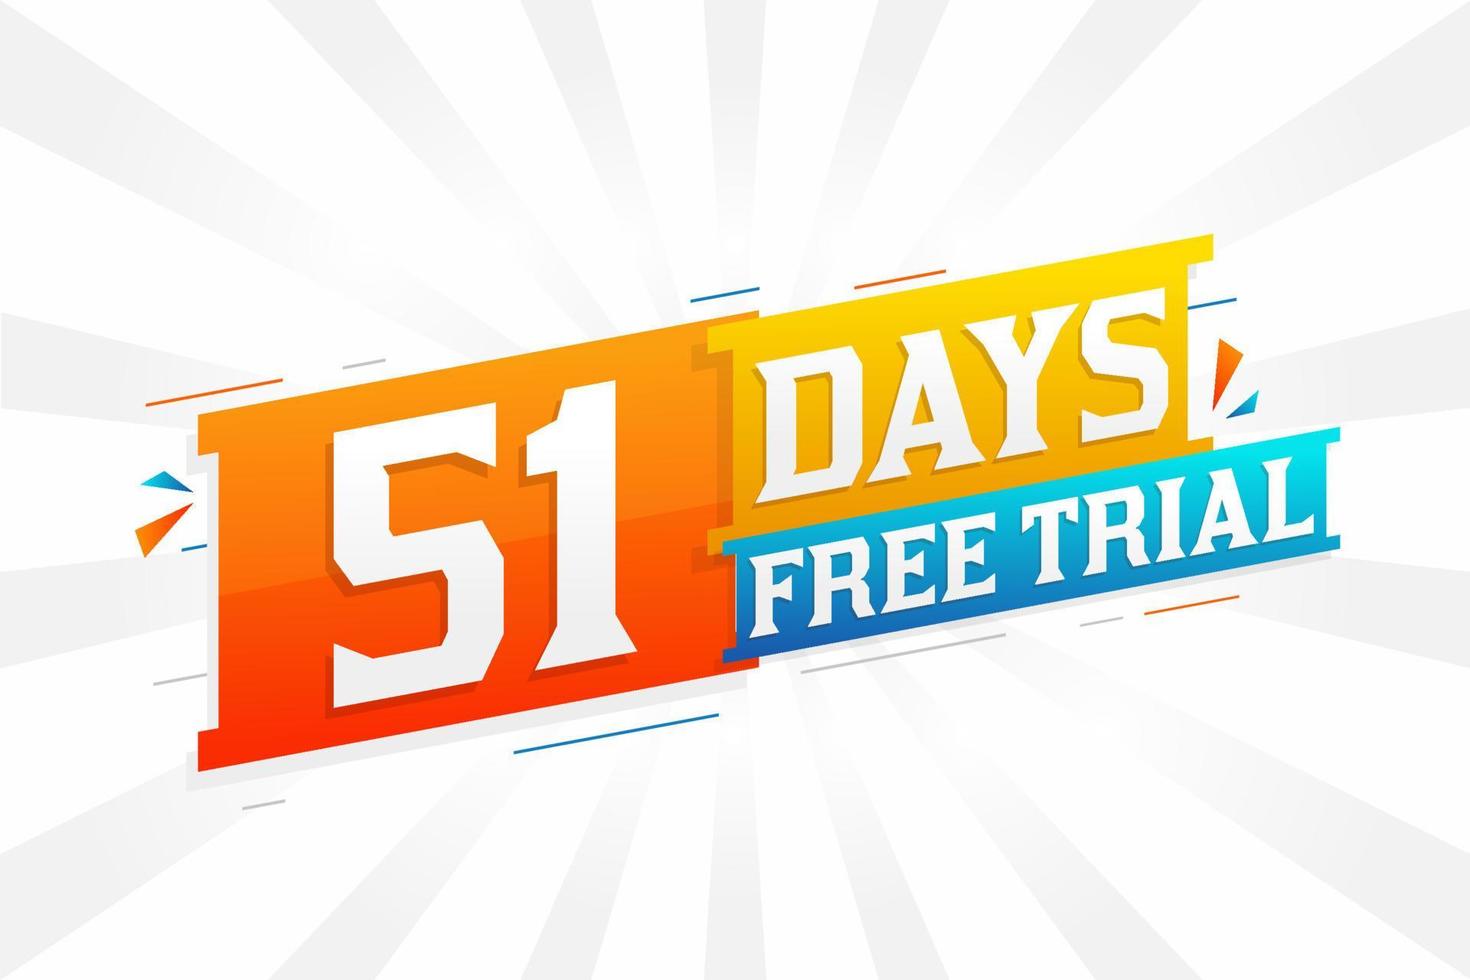 51 Days free Trial promotional bold text stock vector